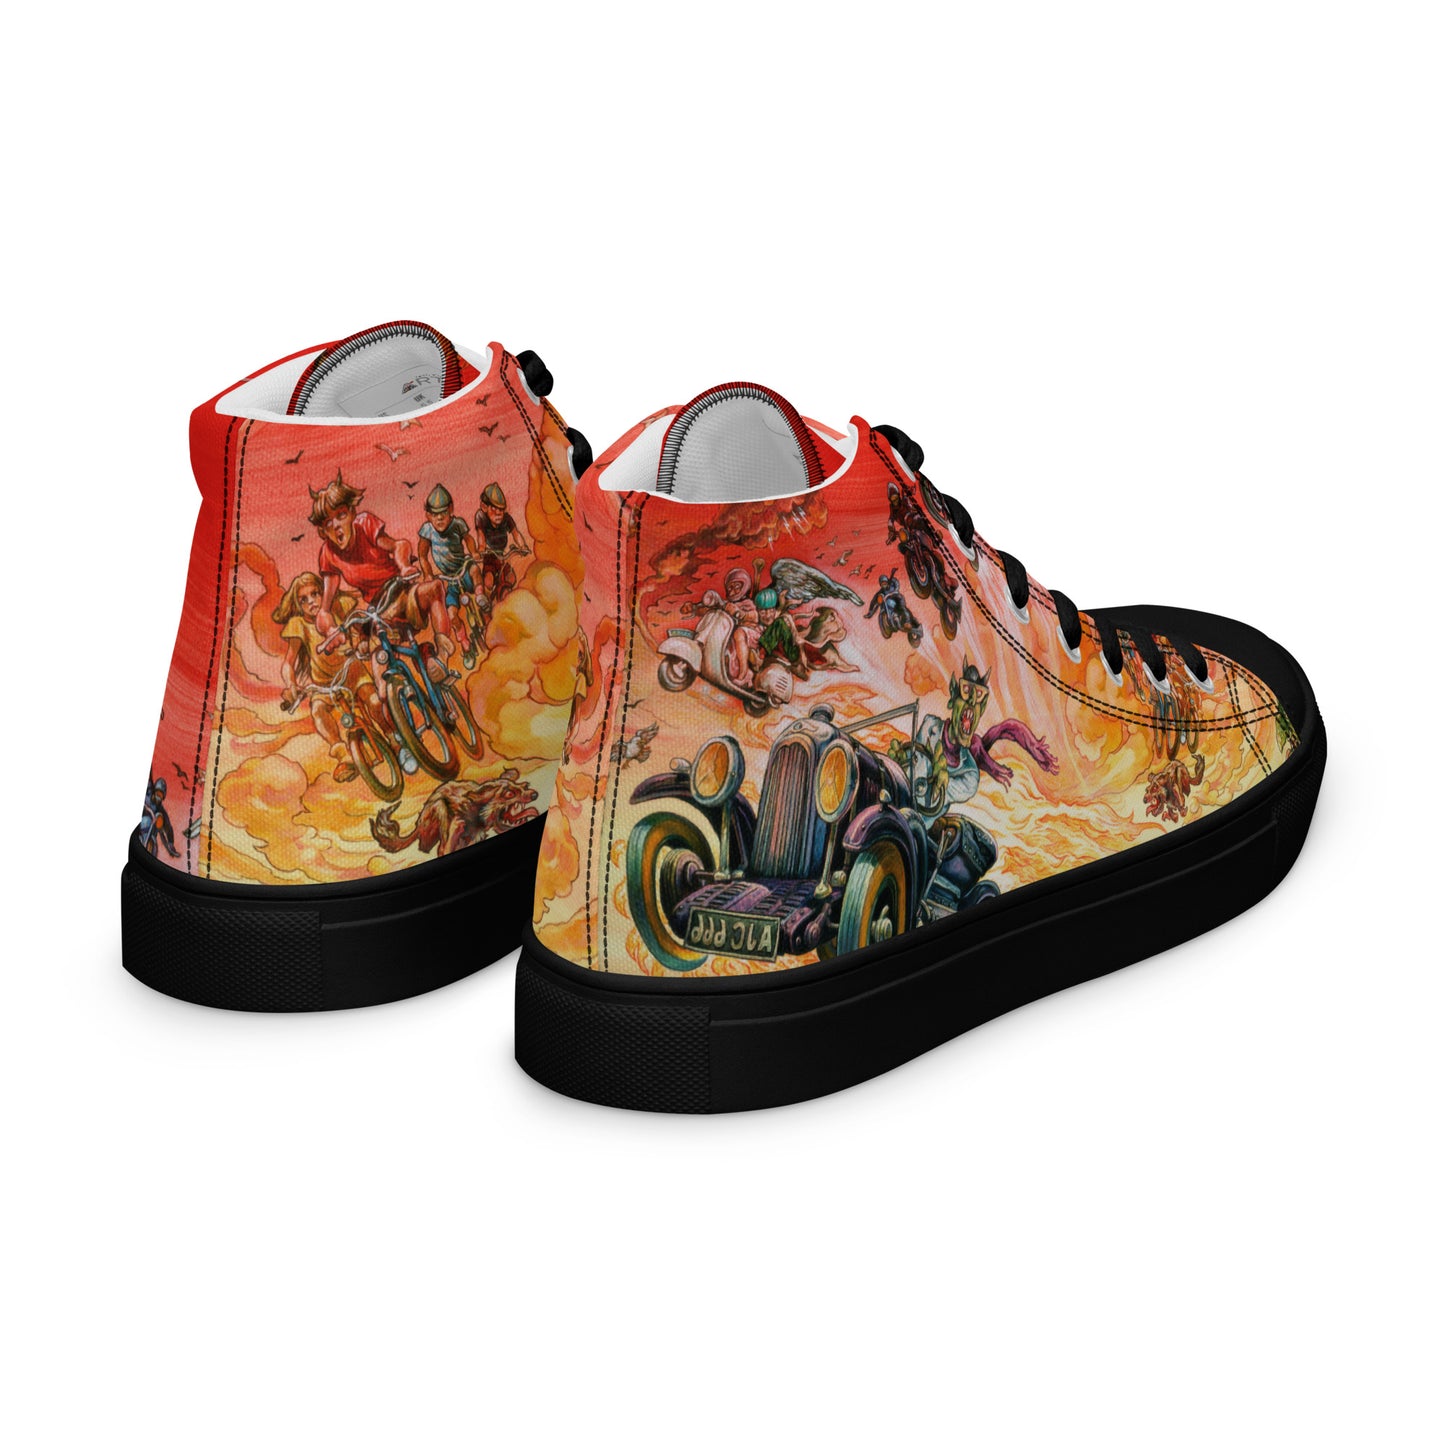 Women’s Good Omens High Top Canvas Shoes - Free Shipping *US SIZES SHOWN! USE CHART!